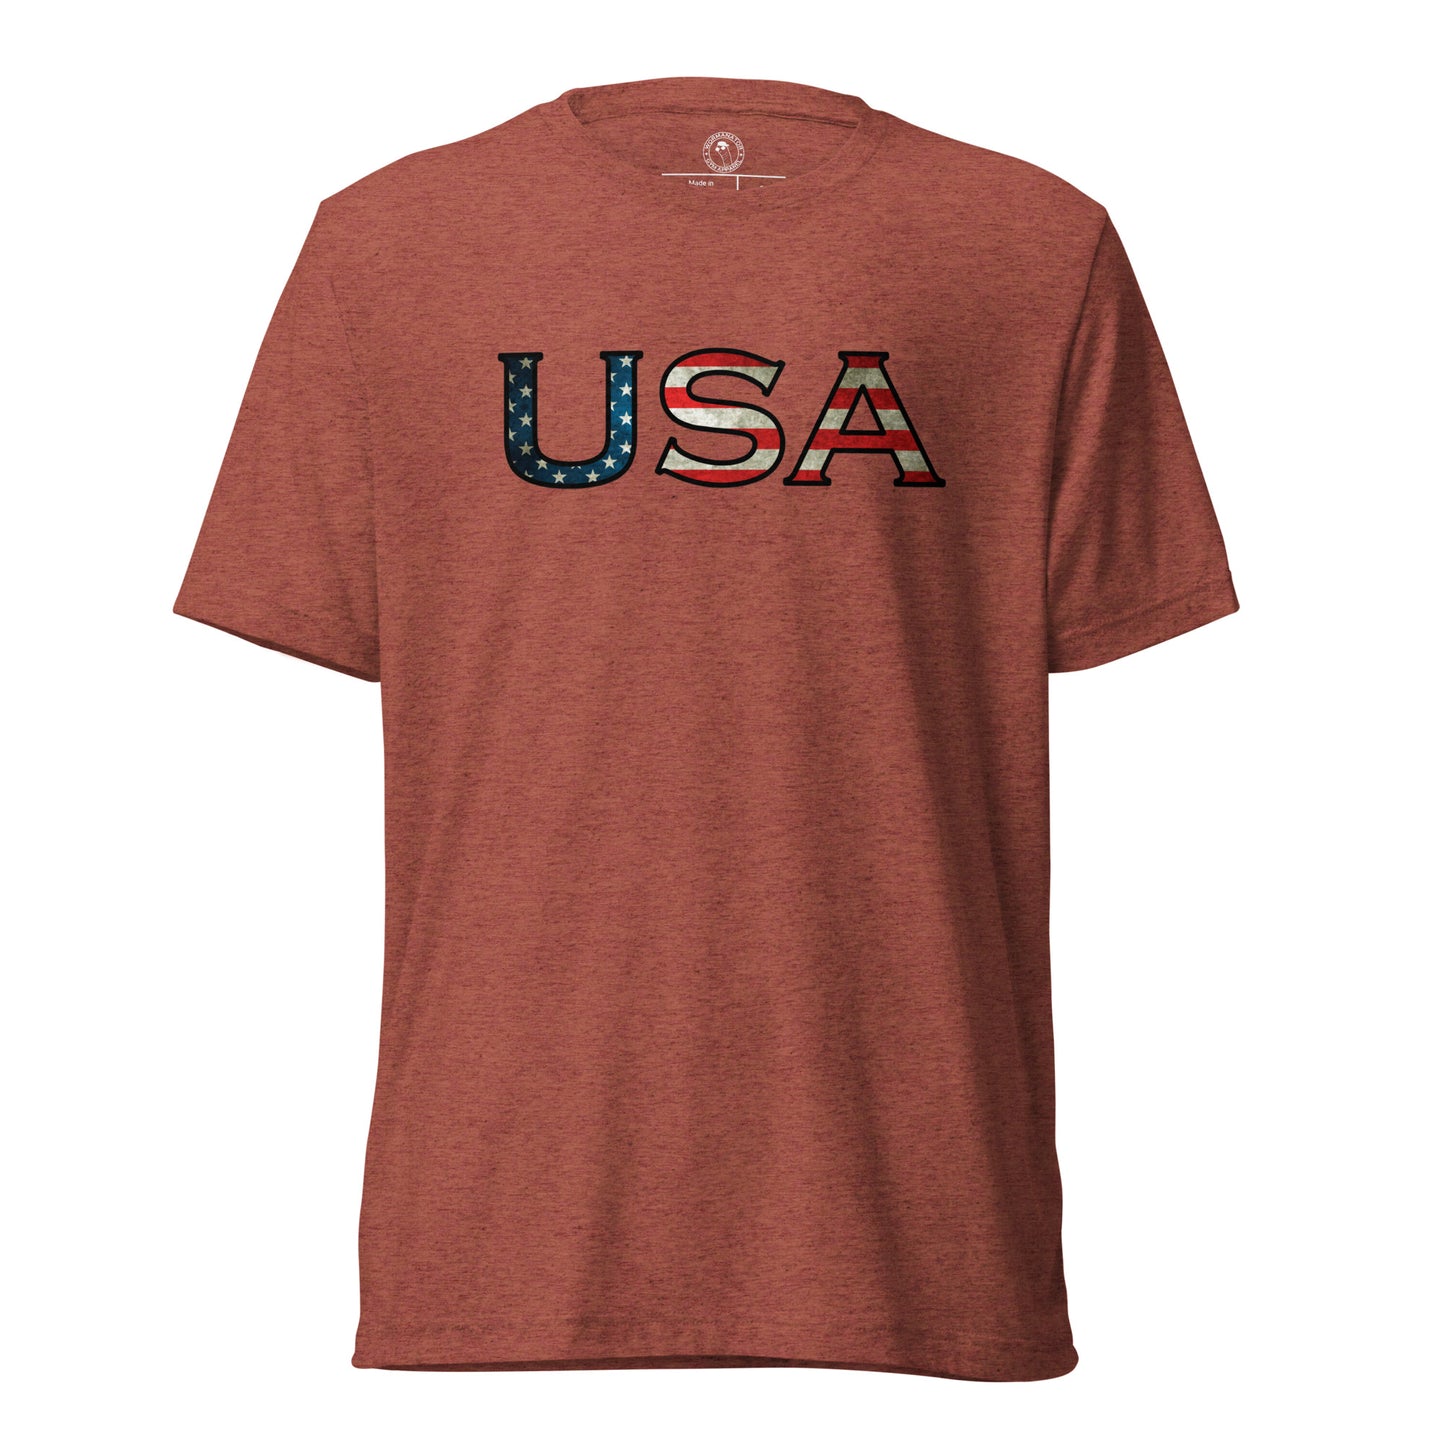 USA T-Shirt in Clay Triblend